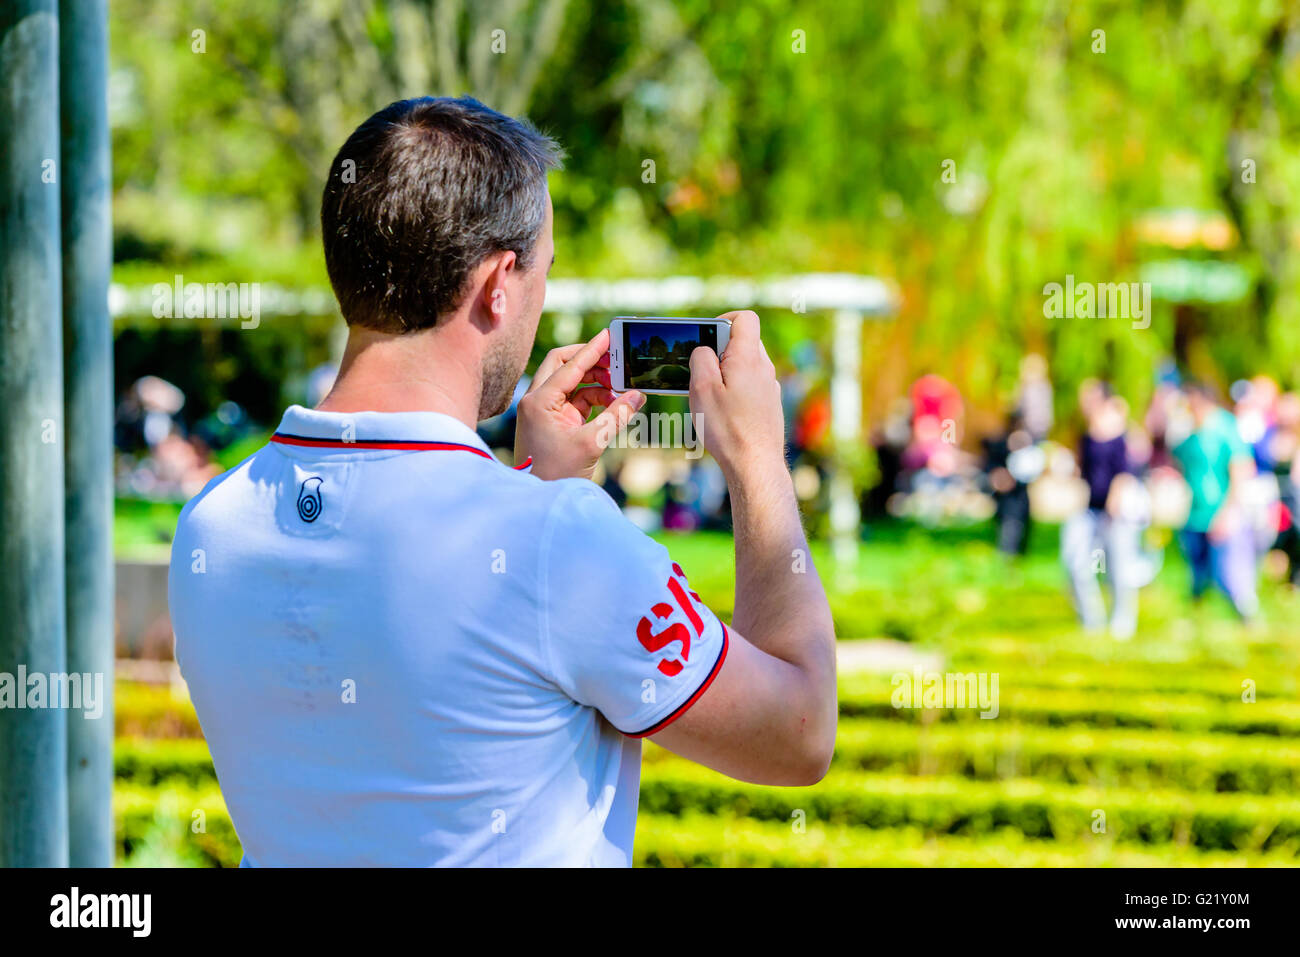 Ronneby, Sweden - May 8, 2016: Male person taking a photograph using his white mobile telephone. People and vegetation blurred o Stock Photo